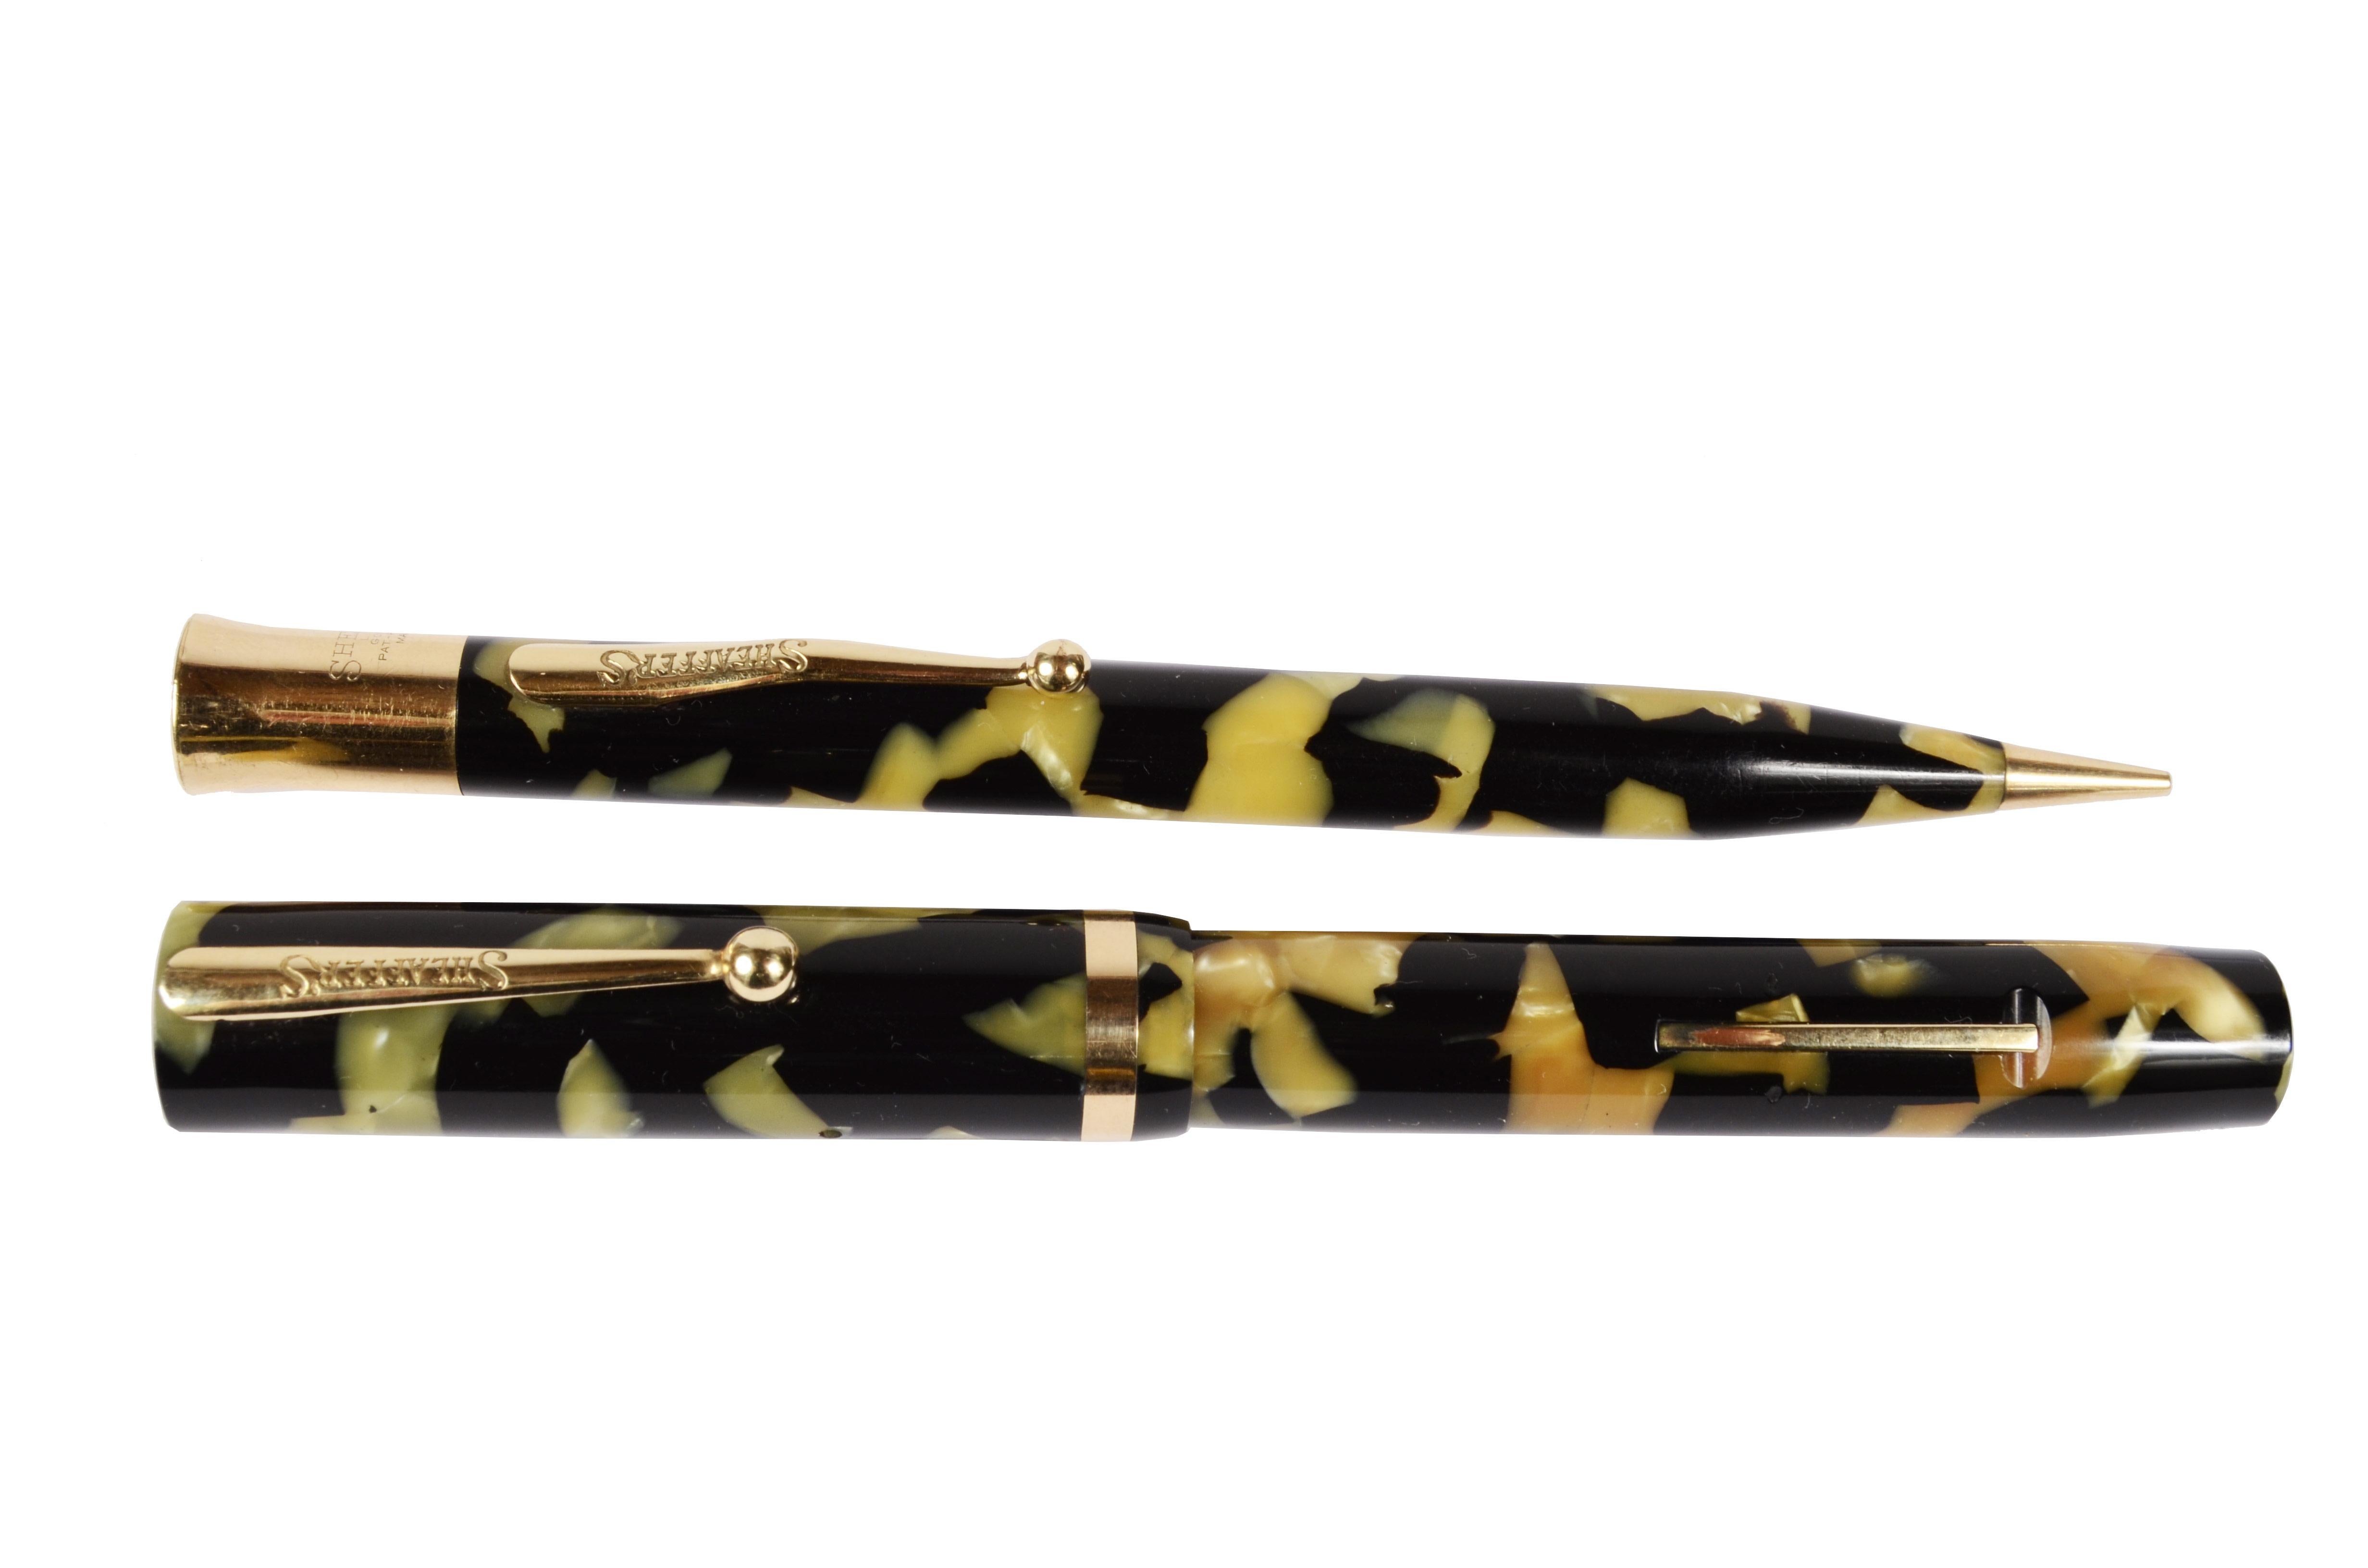 Set Sheaffer Lifetime Senior Flat Top fountain pen and pencil produced in  1927 in black celluloid and mother of pearl, side lever loading, original Sheaffer’s 1487367 nib, fully functional, new loading rubber. 
Very good  condition. 
Length 13.5 cm